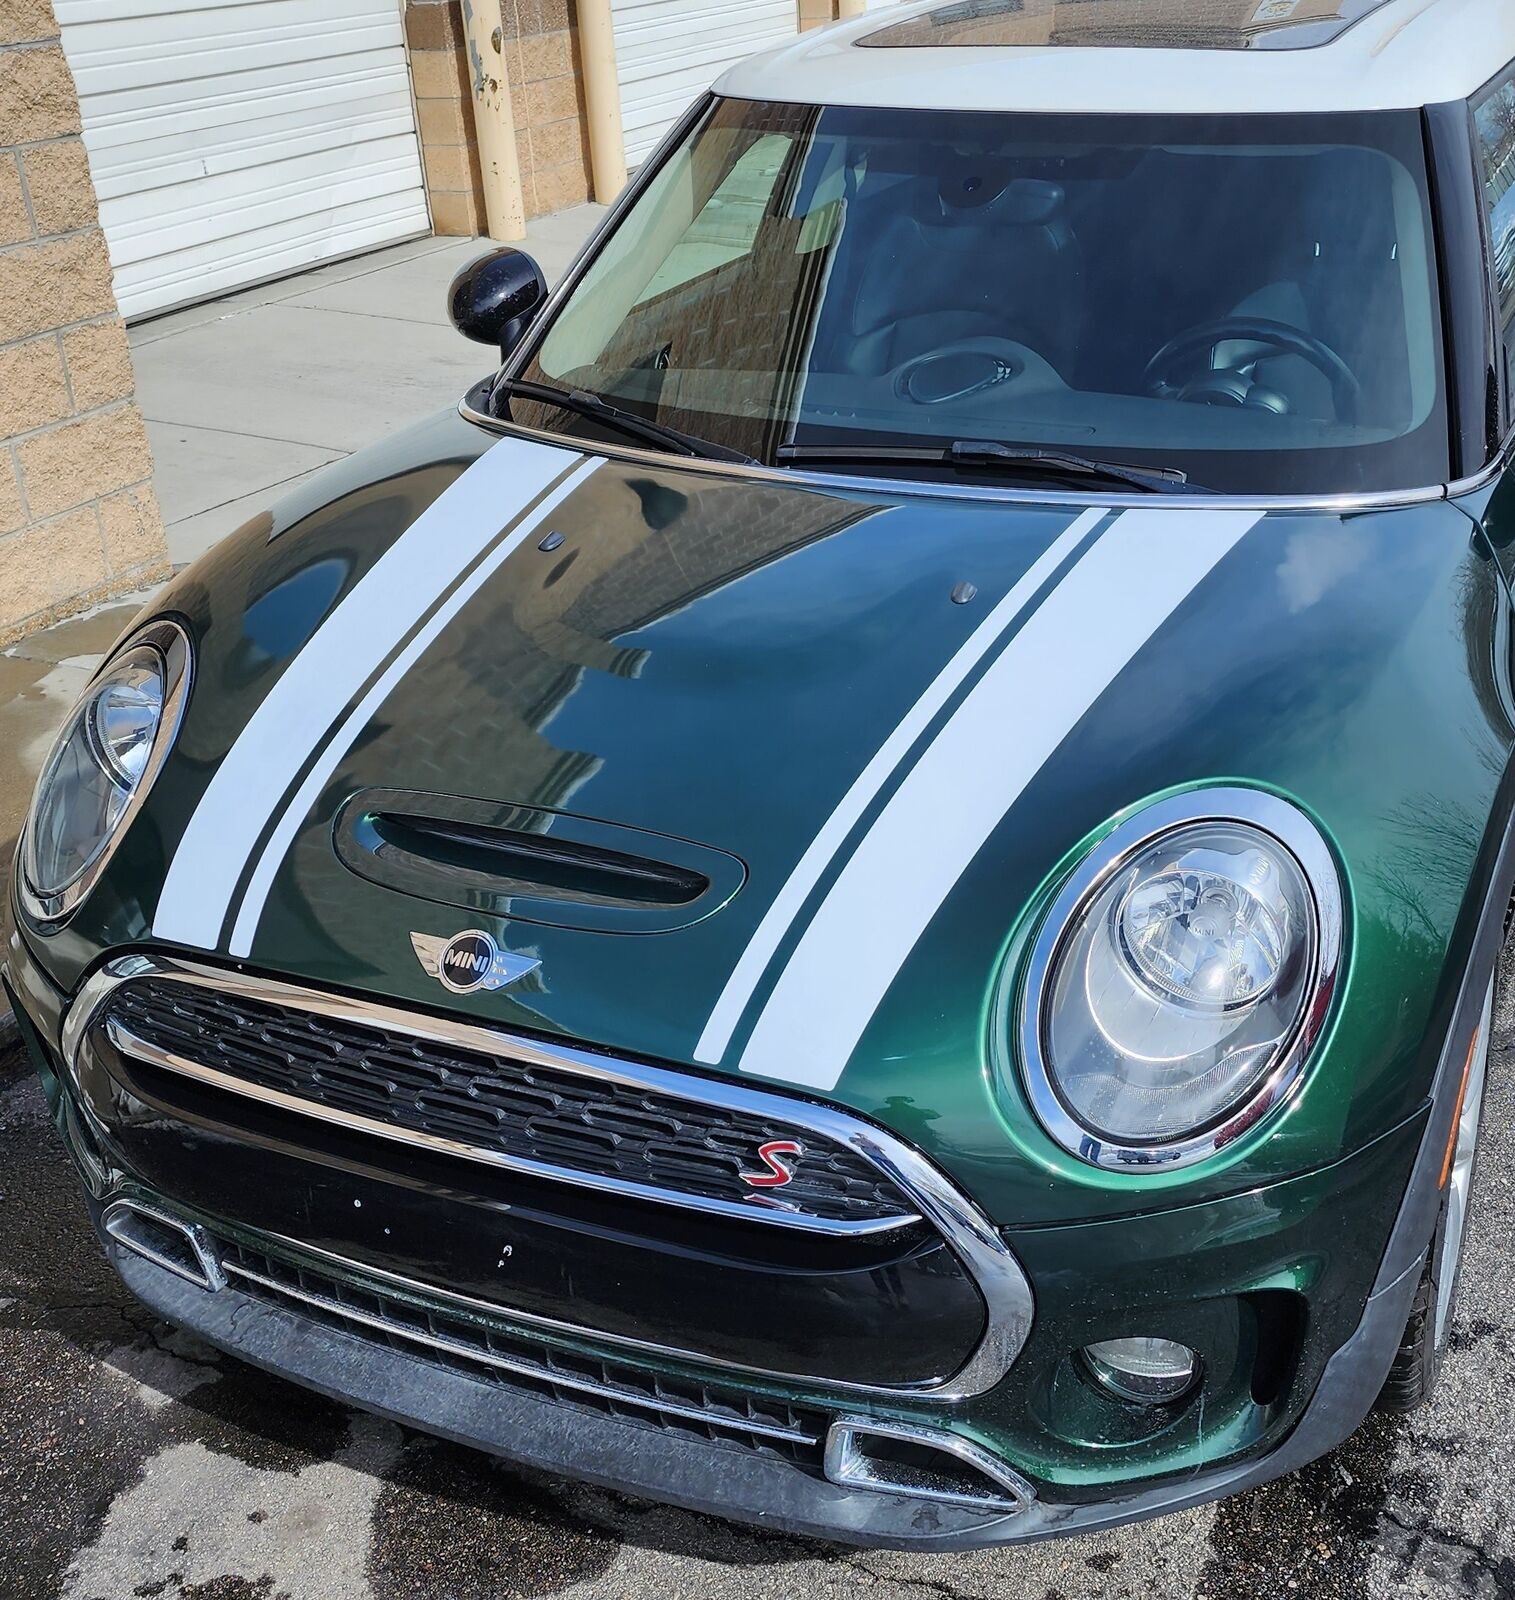 green mini cooper with white racing stripes on hood